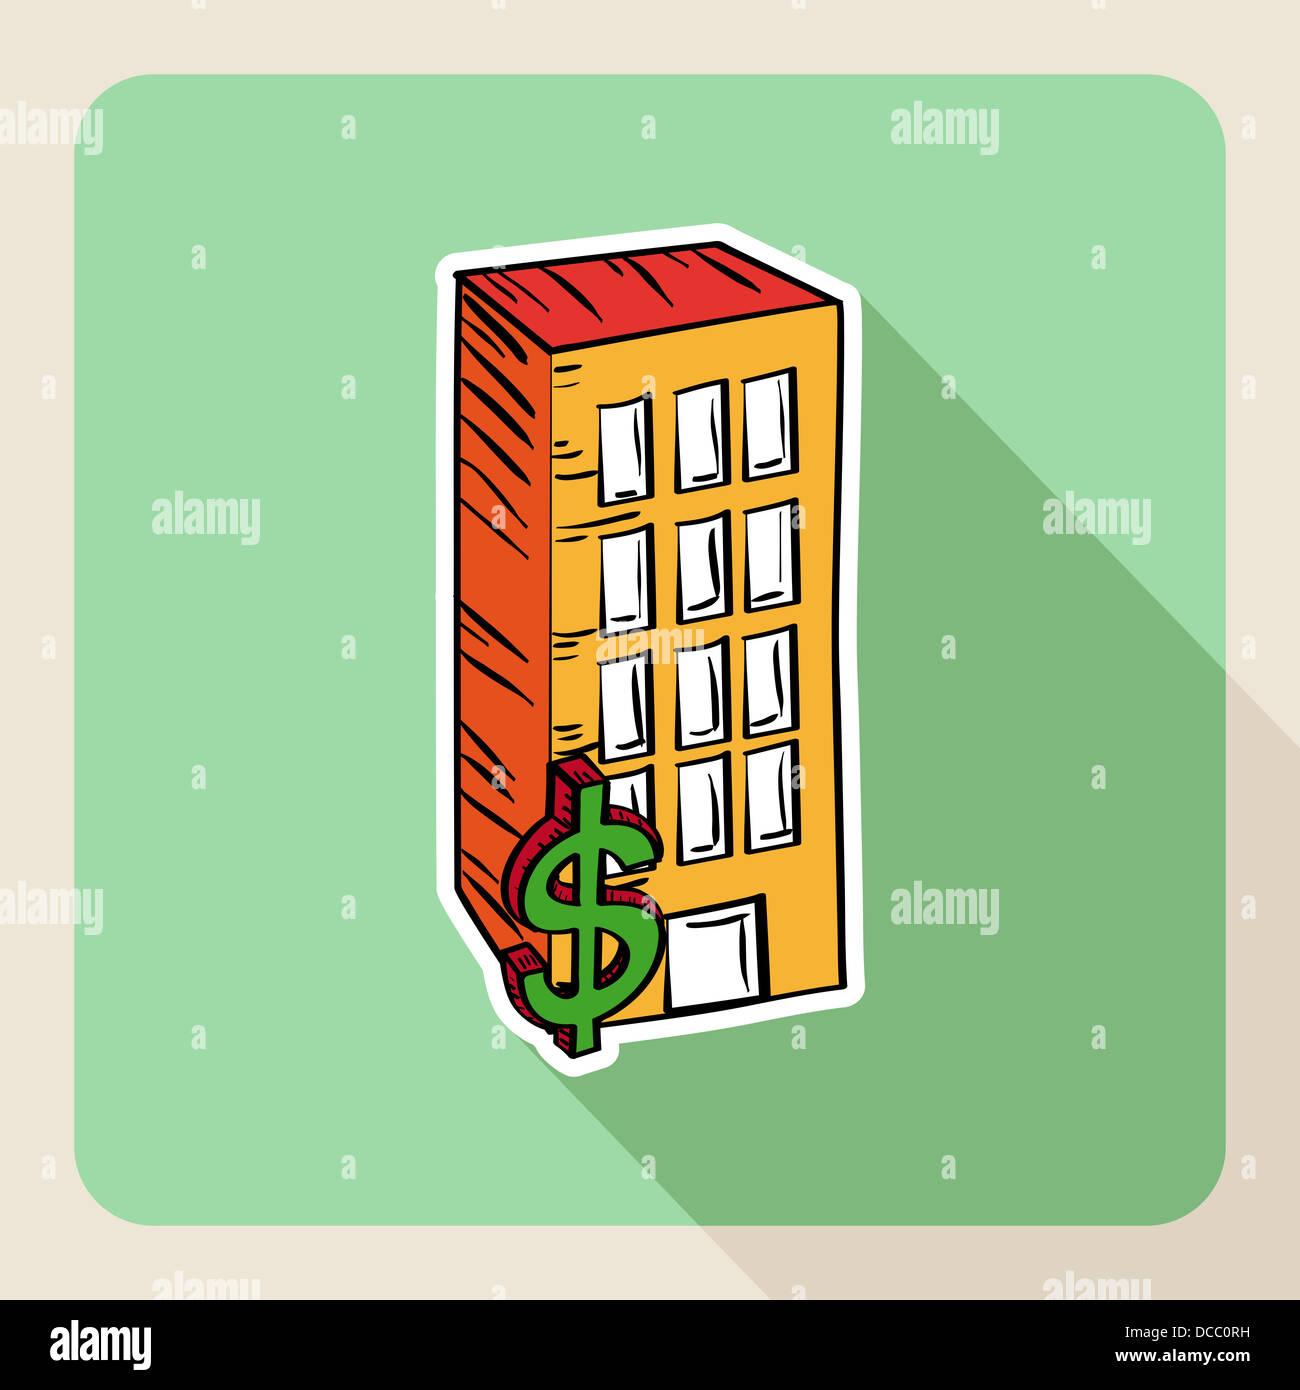 Sketch style real state building buy rent flat icon. Vector file layered for easy editing. Stock Photo